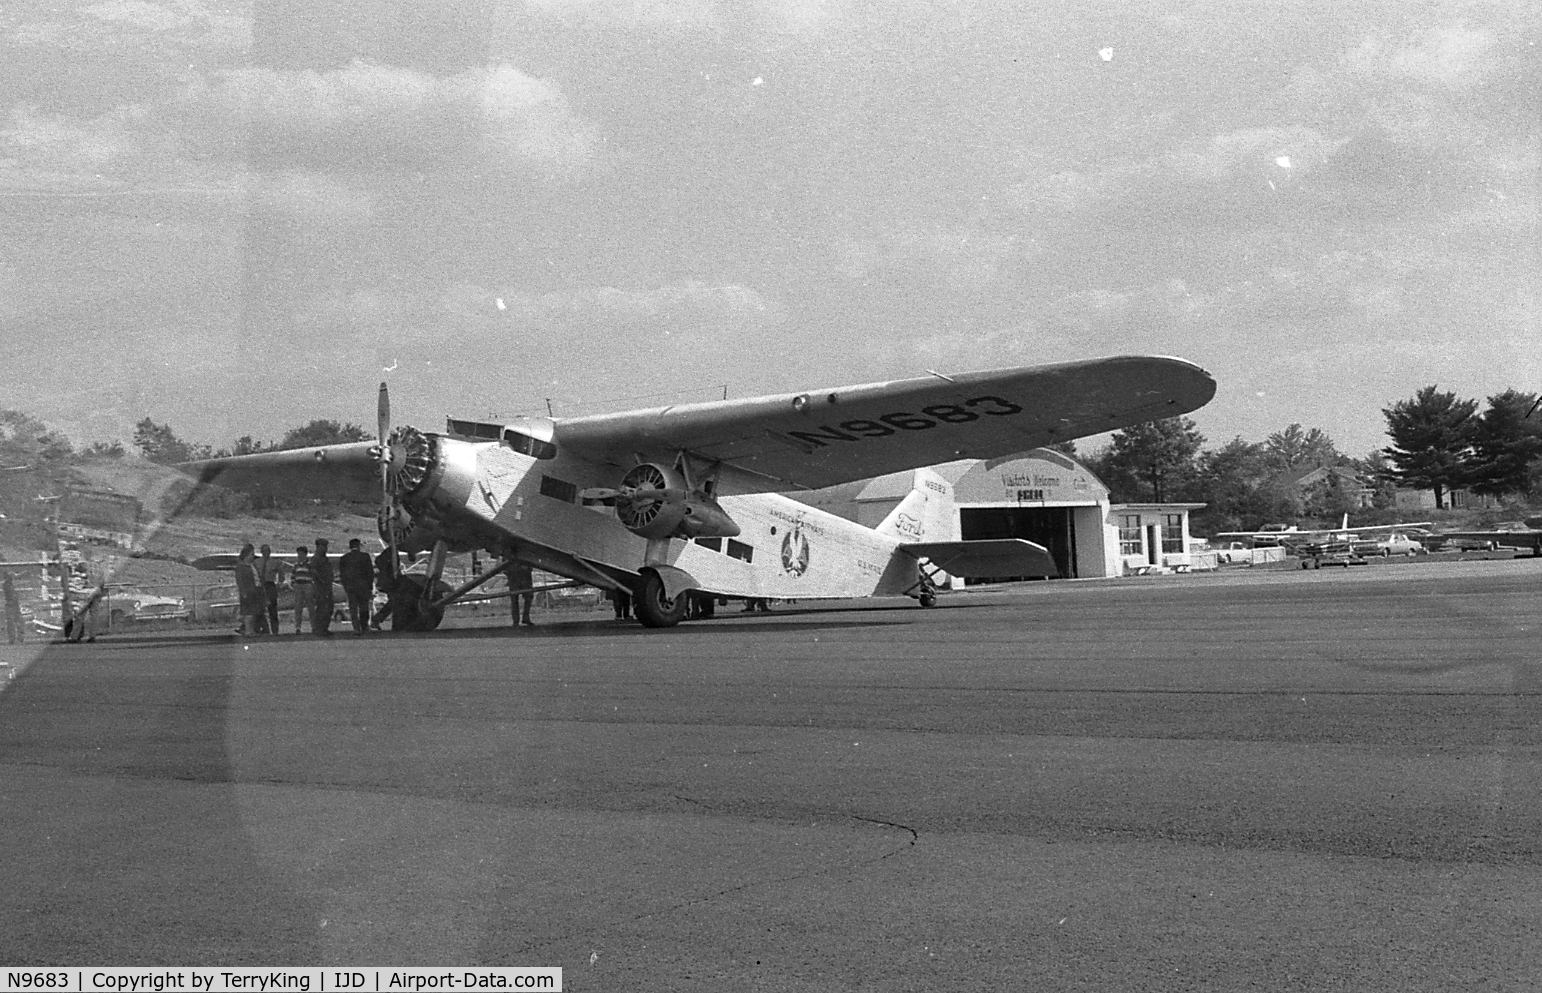 N9683, 1929 Ford 5-AT-B Tri-Motor C/N 39, N9683 on the ground at Windham Airport near Willimantic Connecticut in 1962 as American Airlines did a farewell tour before presenting the aircraft to the Smithsonian, where it remains today. I was credentialed as a broadcast journalist and got to fly!